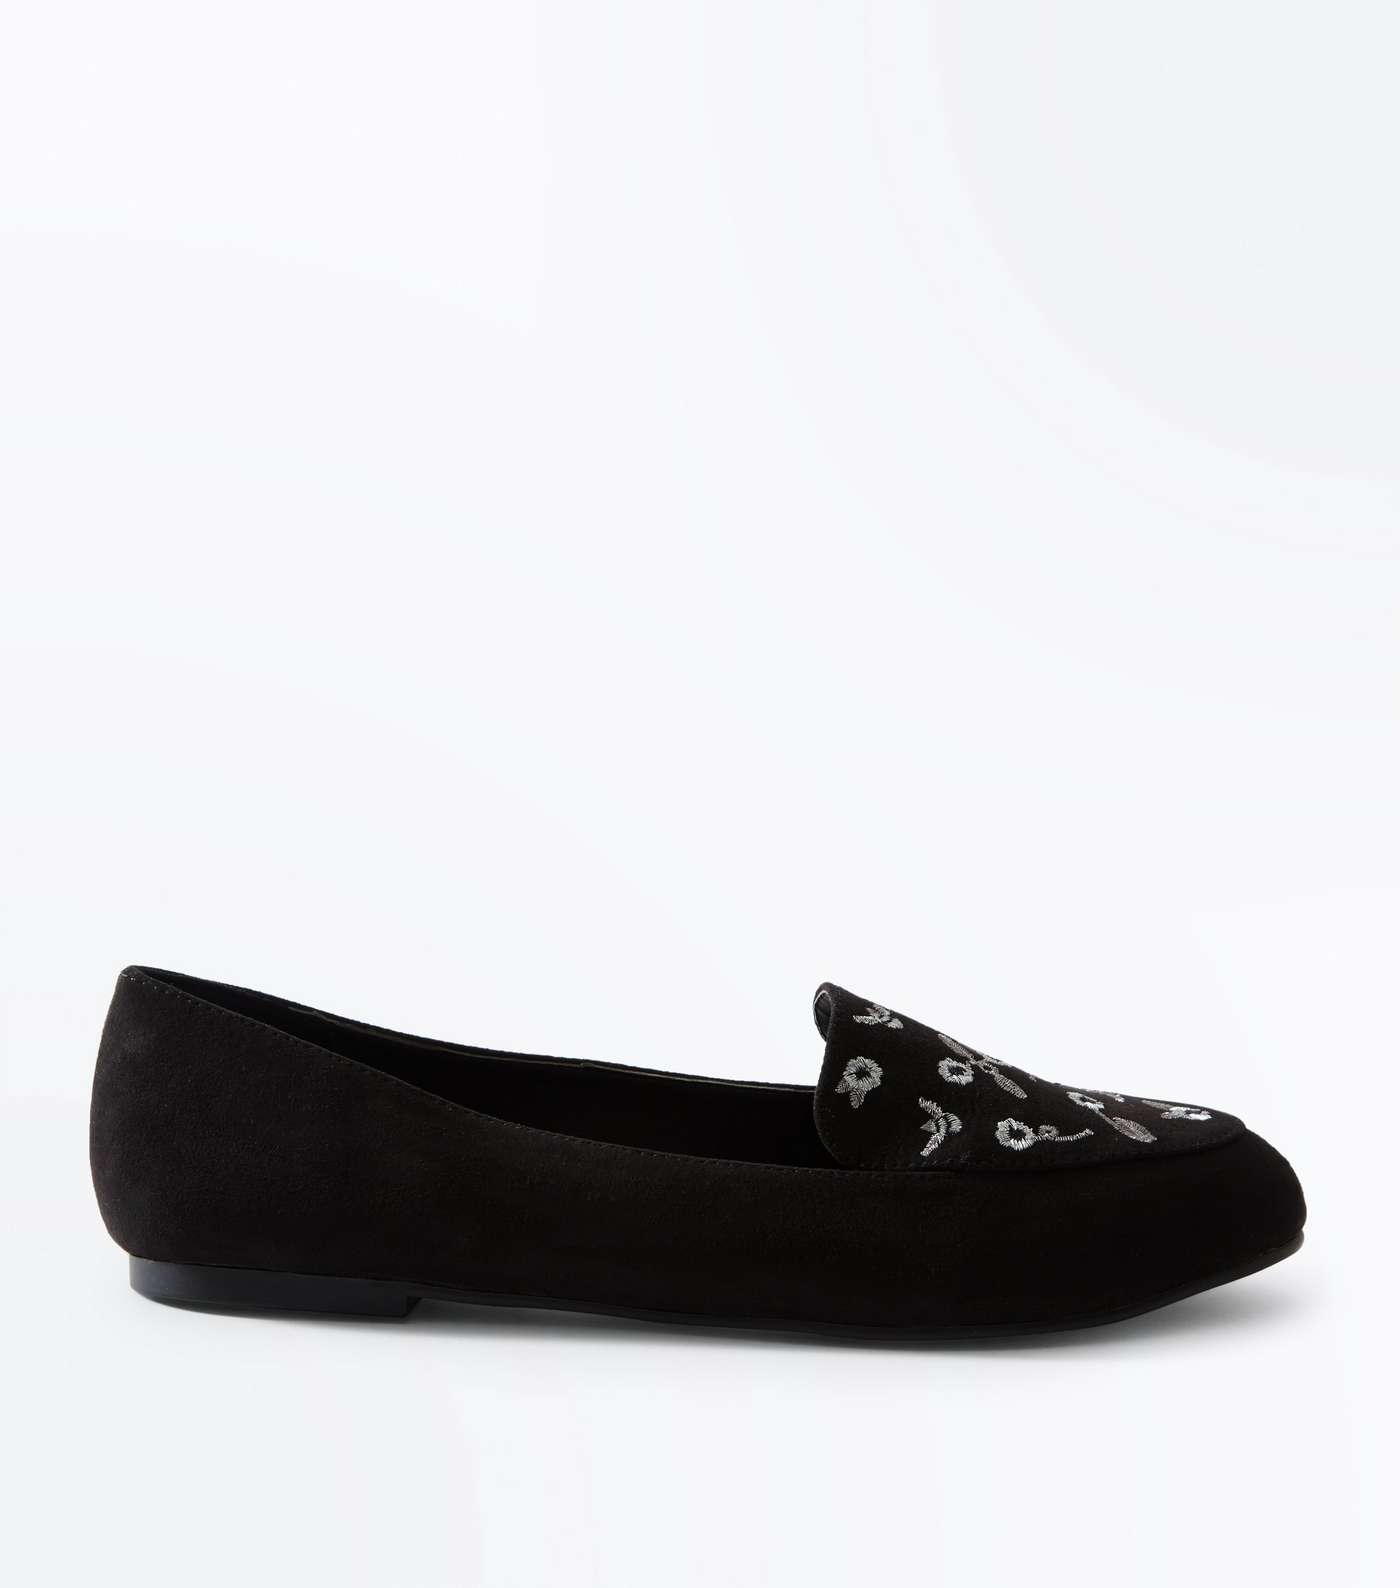 Black Suedette Floral Embroidered Loafers